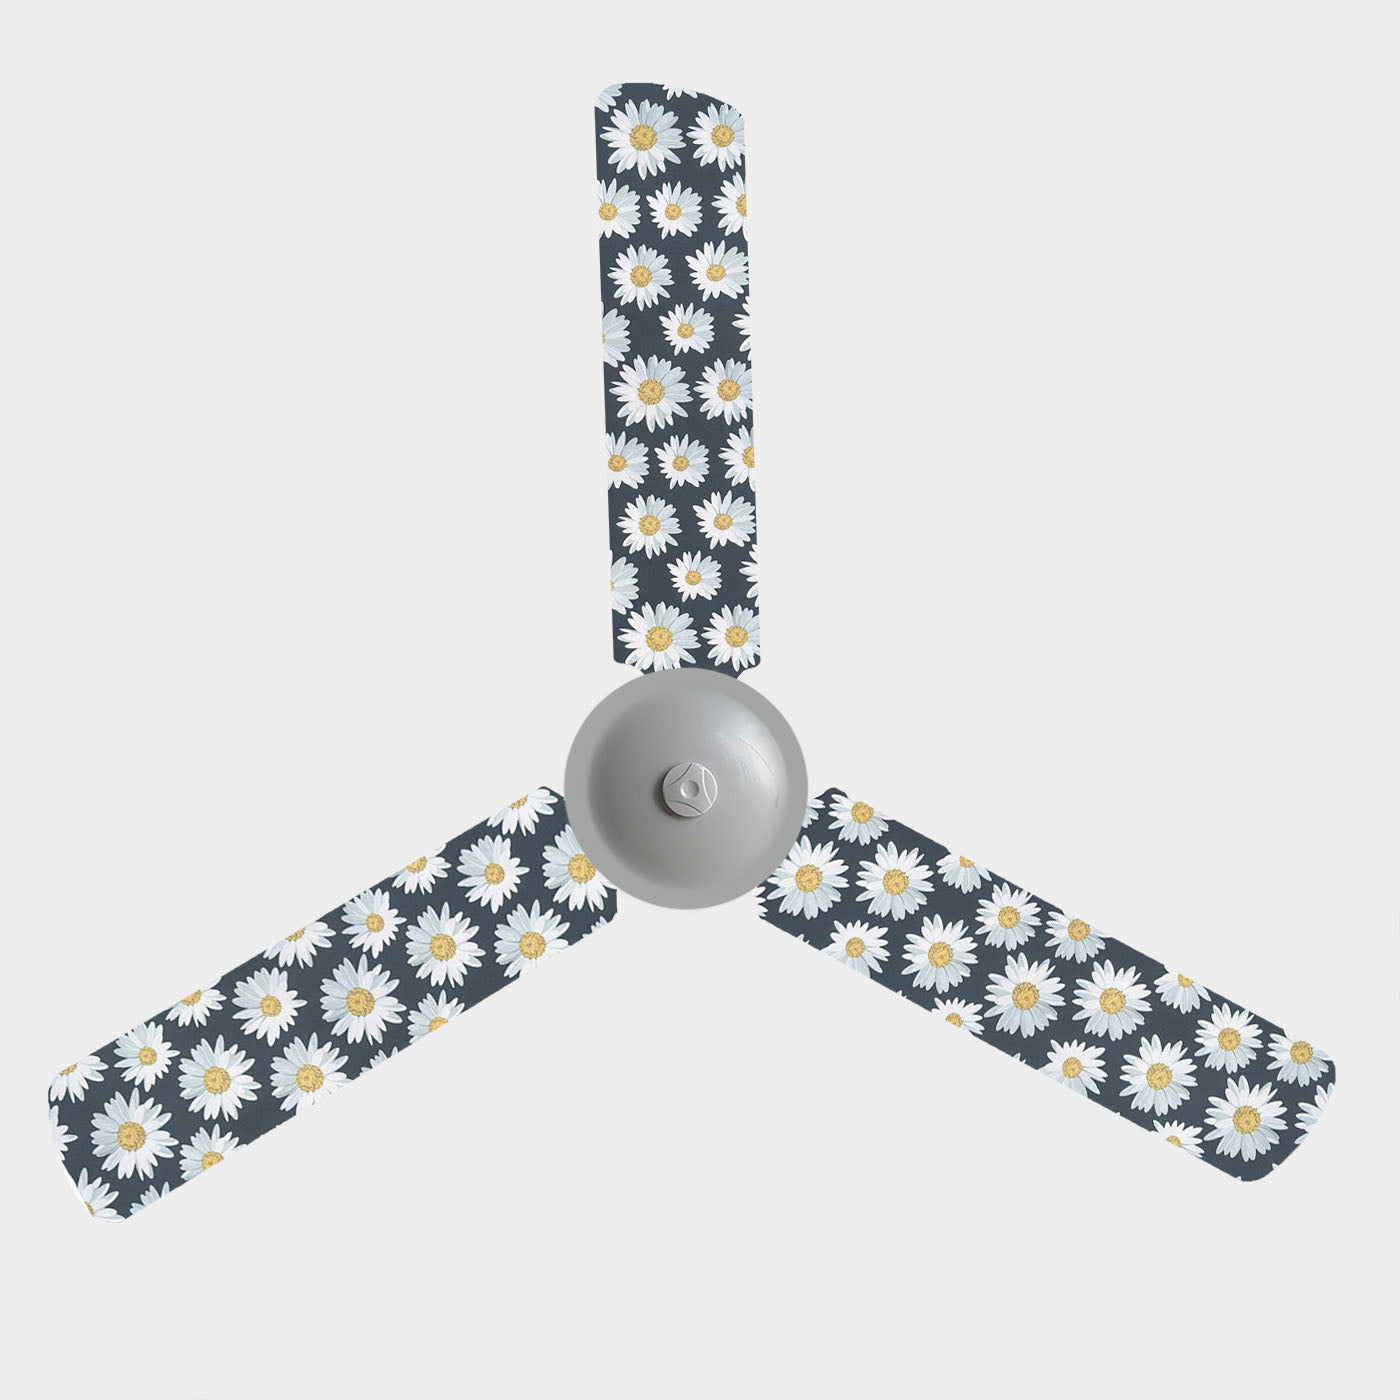 3 blade ceiling fan blade covers with daisies on a black background